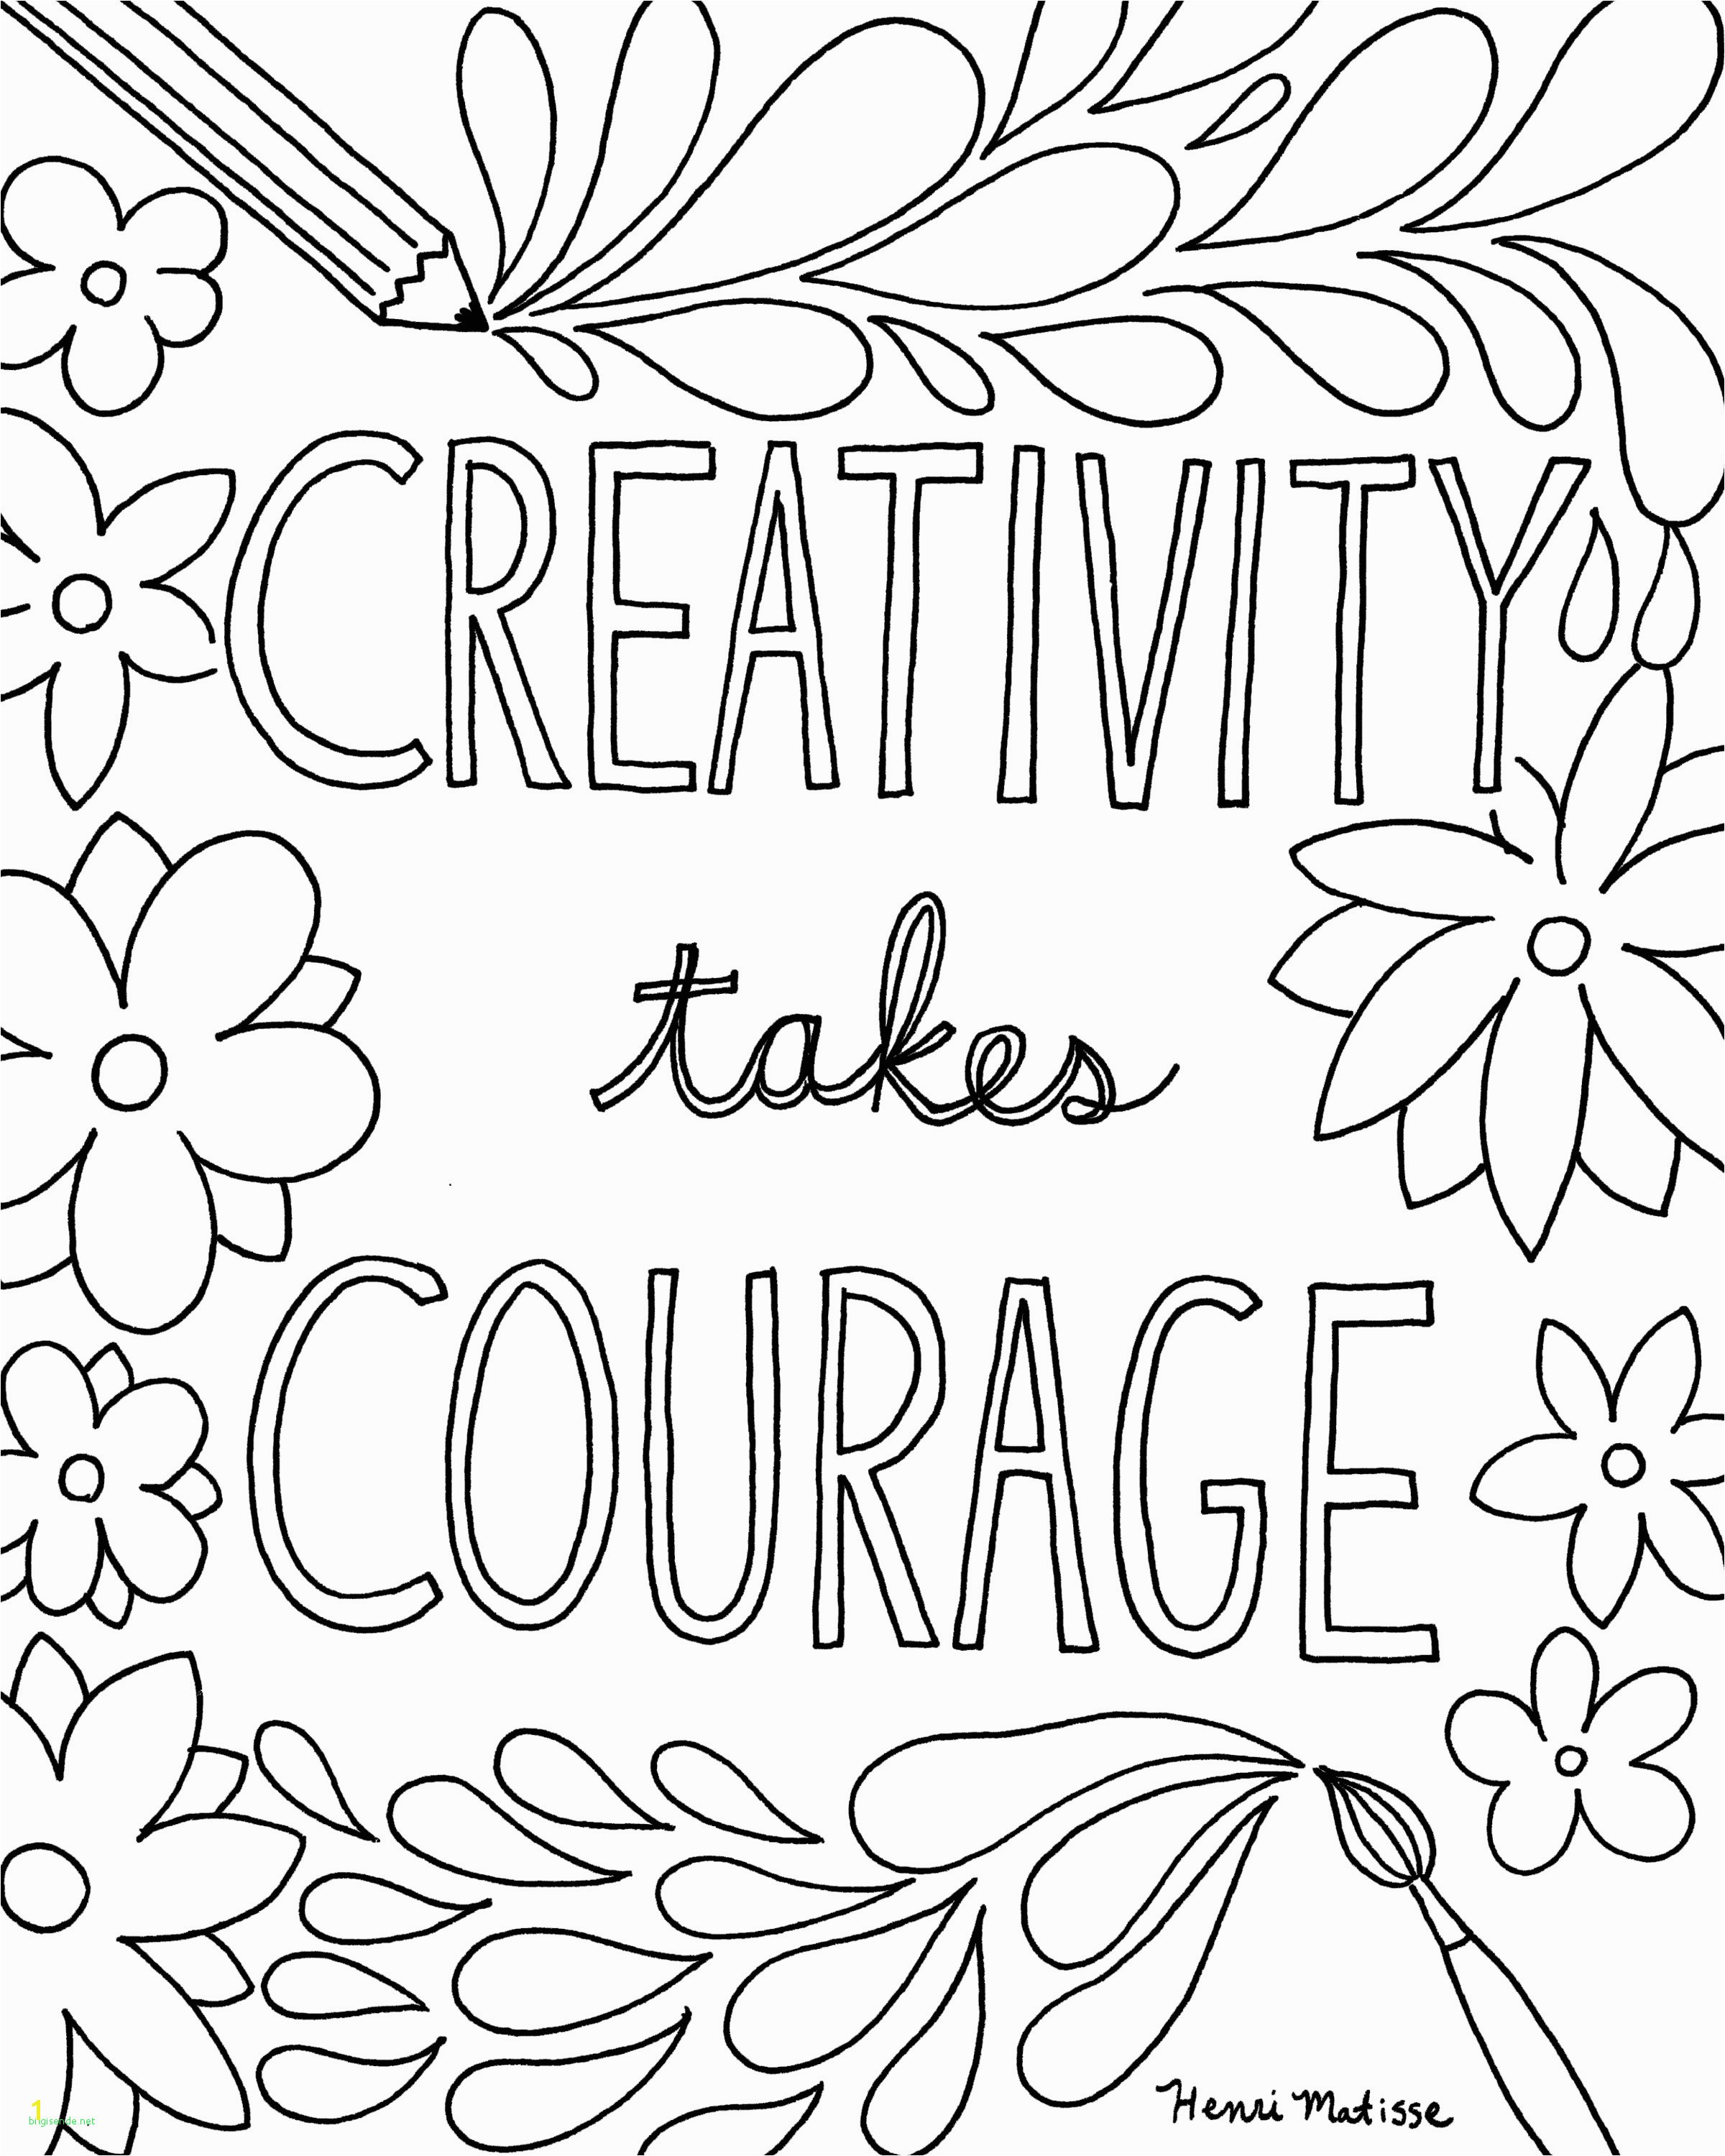 Sayings Coloring Pages Elegant Free Printable Coloring Pages for Girls Inspirational